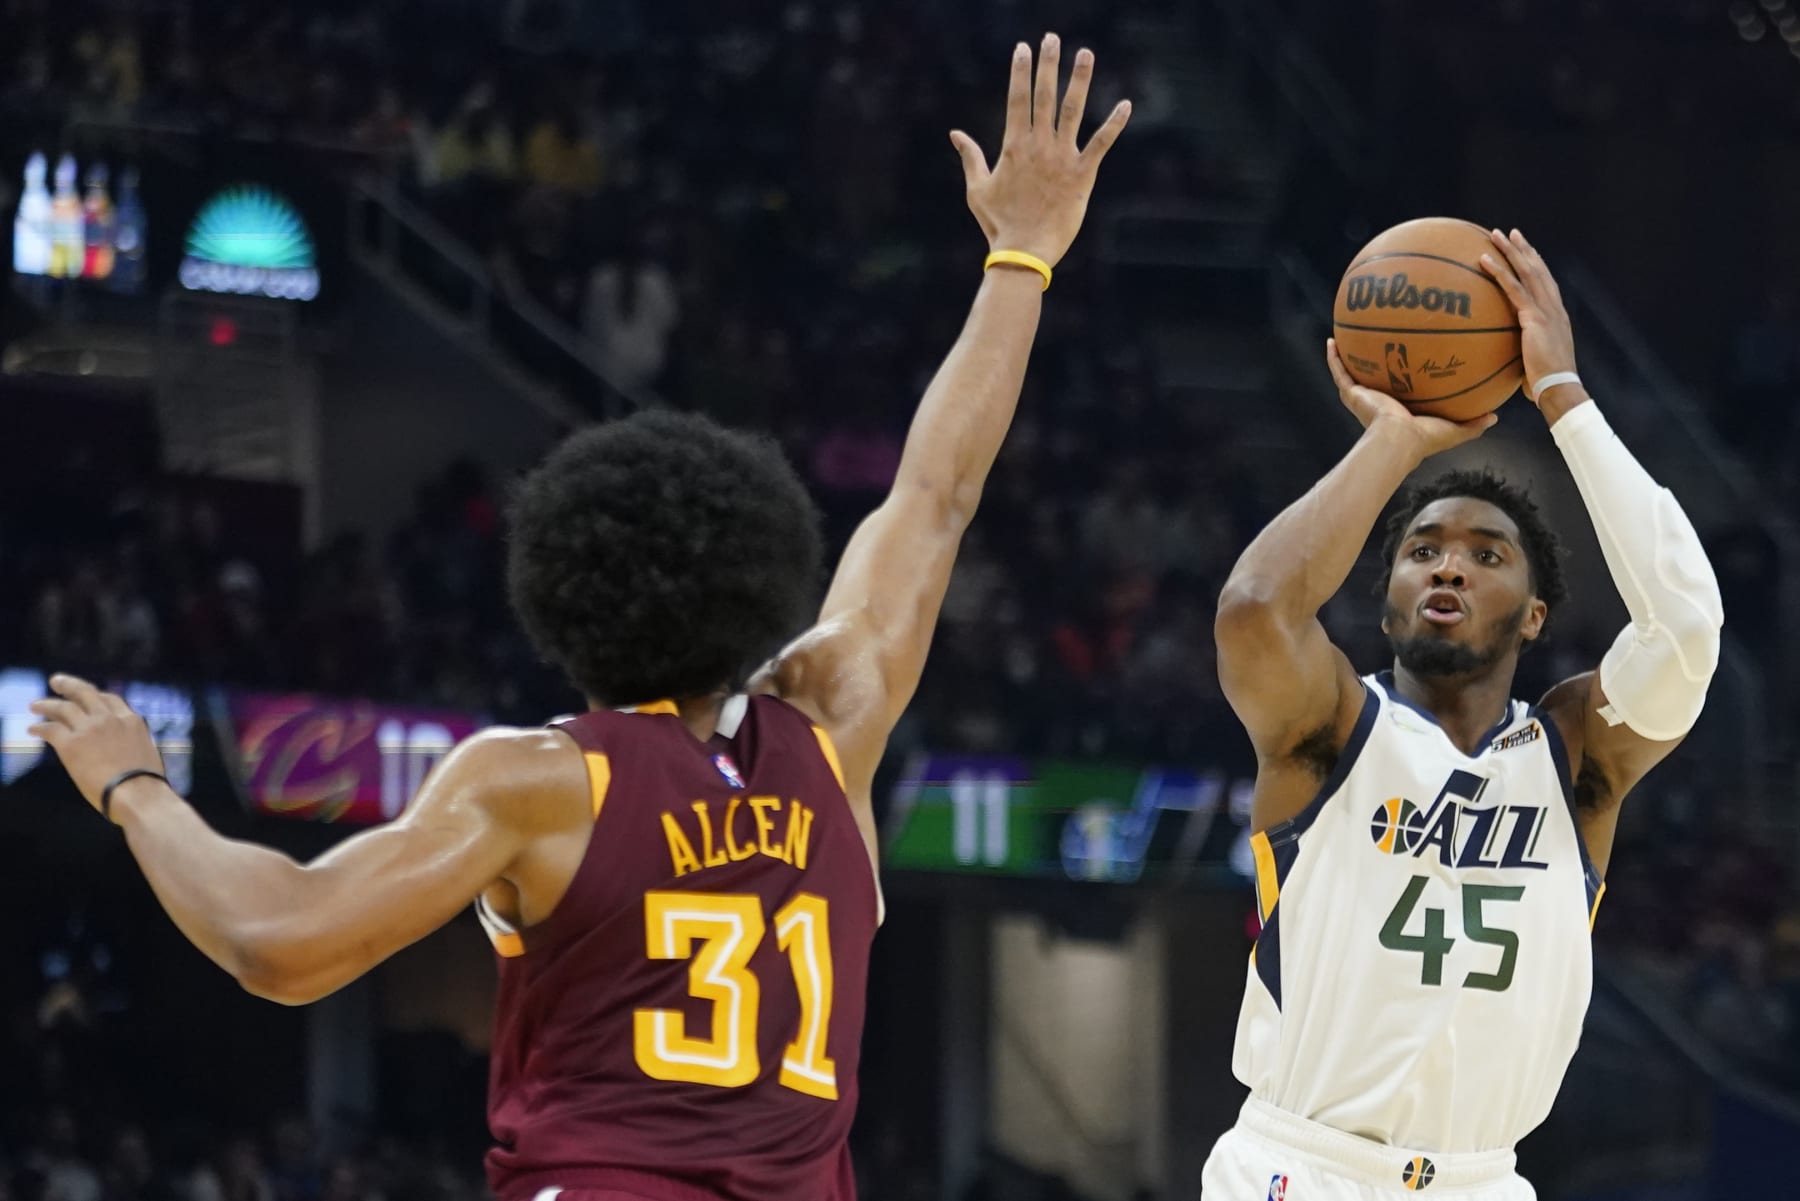 Donovan Mitchell continues to flirt with the New York Knicks